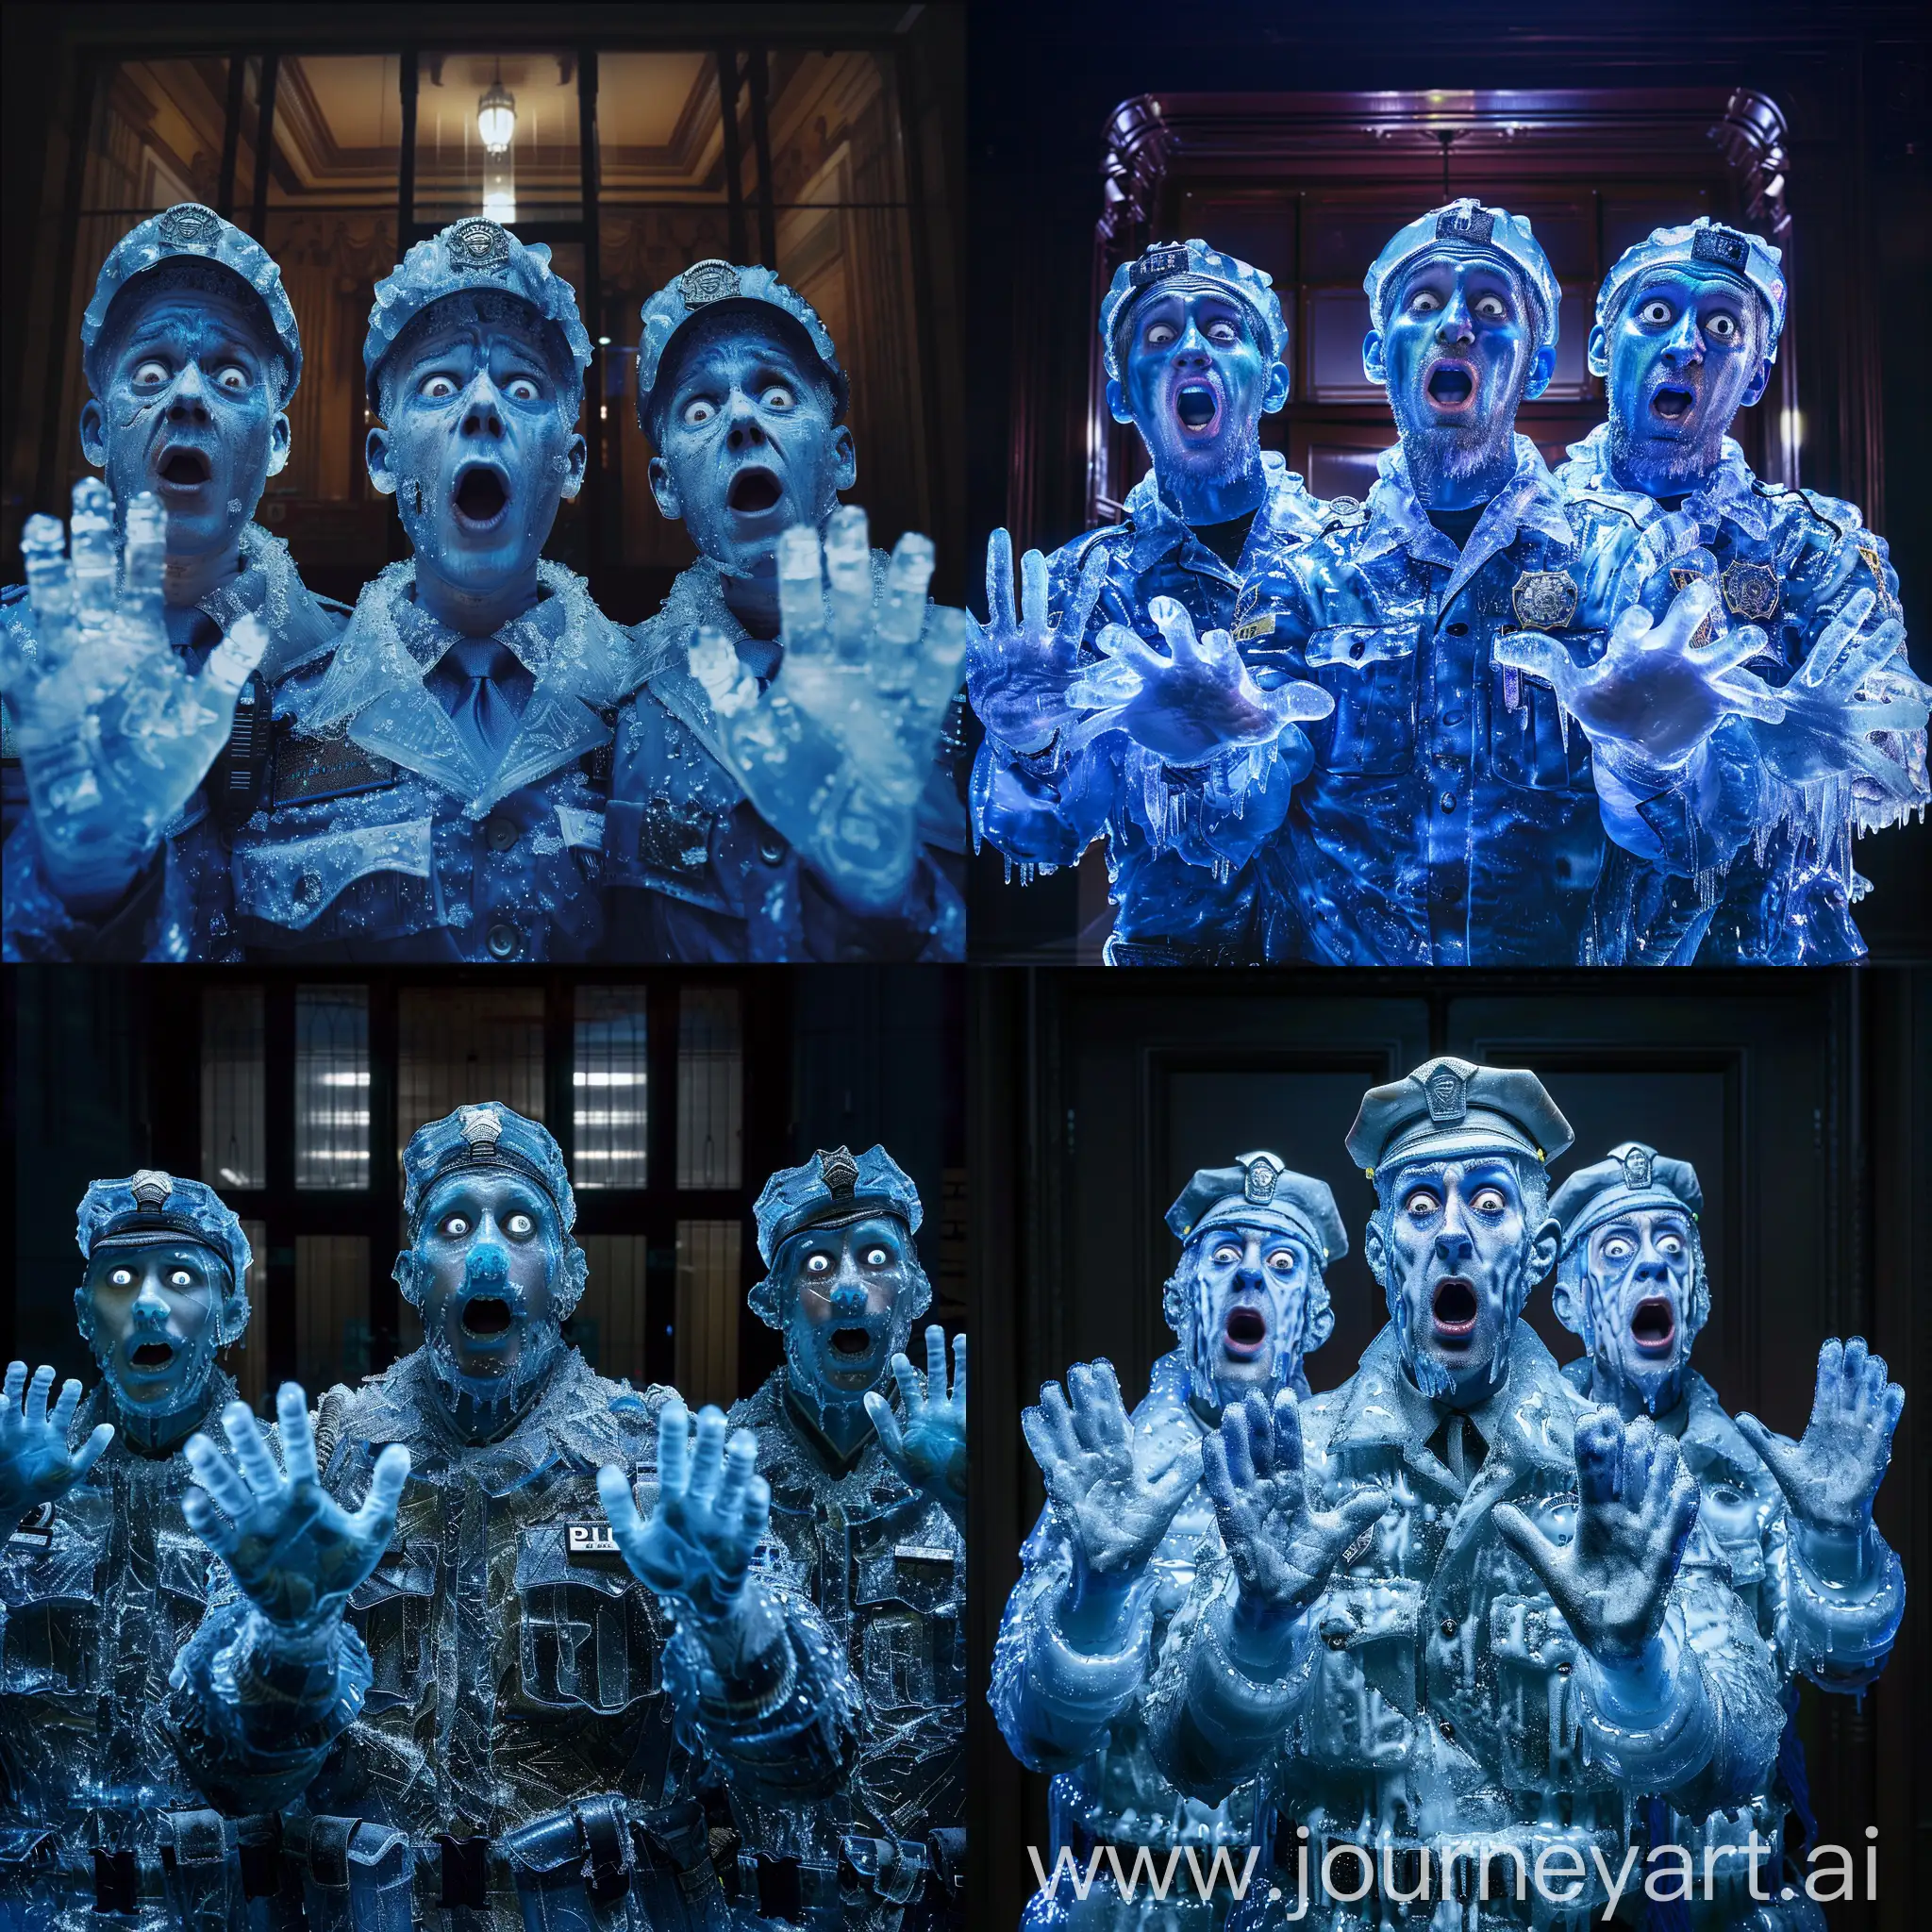 Low lighting, realistic, three frozen handsome young good looking shocked cops with their hands up, cops made of ice, covered in frost ice, distressed good looking faces with frosty faces and frosty hair, cop with blue frosty skin, white frosty blank white eyes, handsome men wearing frozen frosty police uniforms, turned into ice statues, realistic ice statues of police officers, frozen skins and frozen uniforms, empty bank at night background, low lighting, cinematic lighting